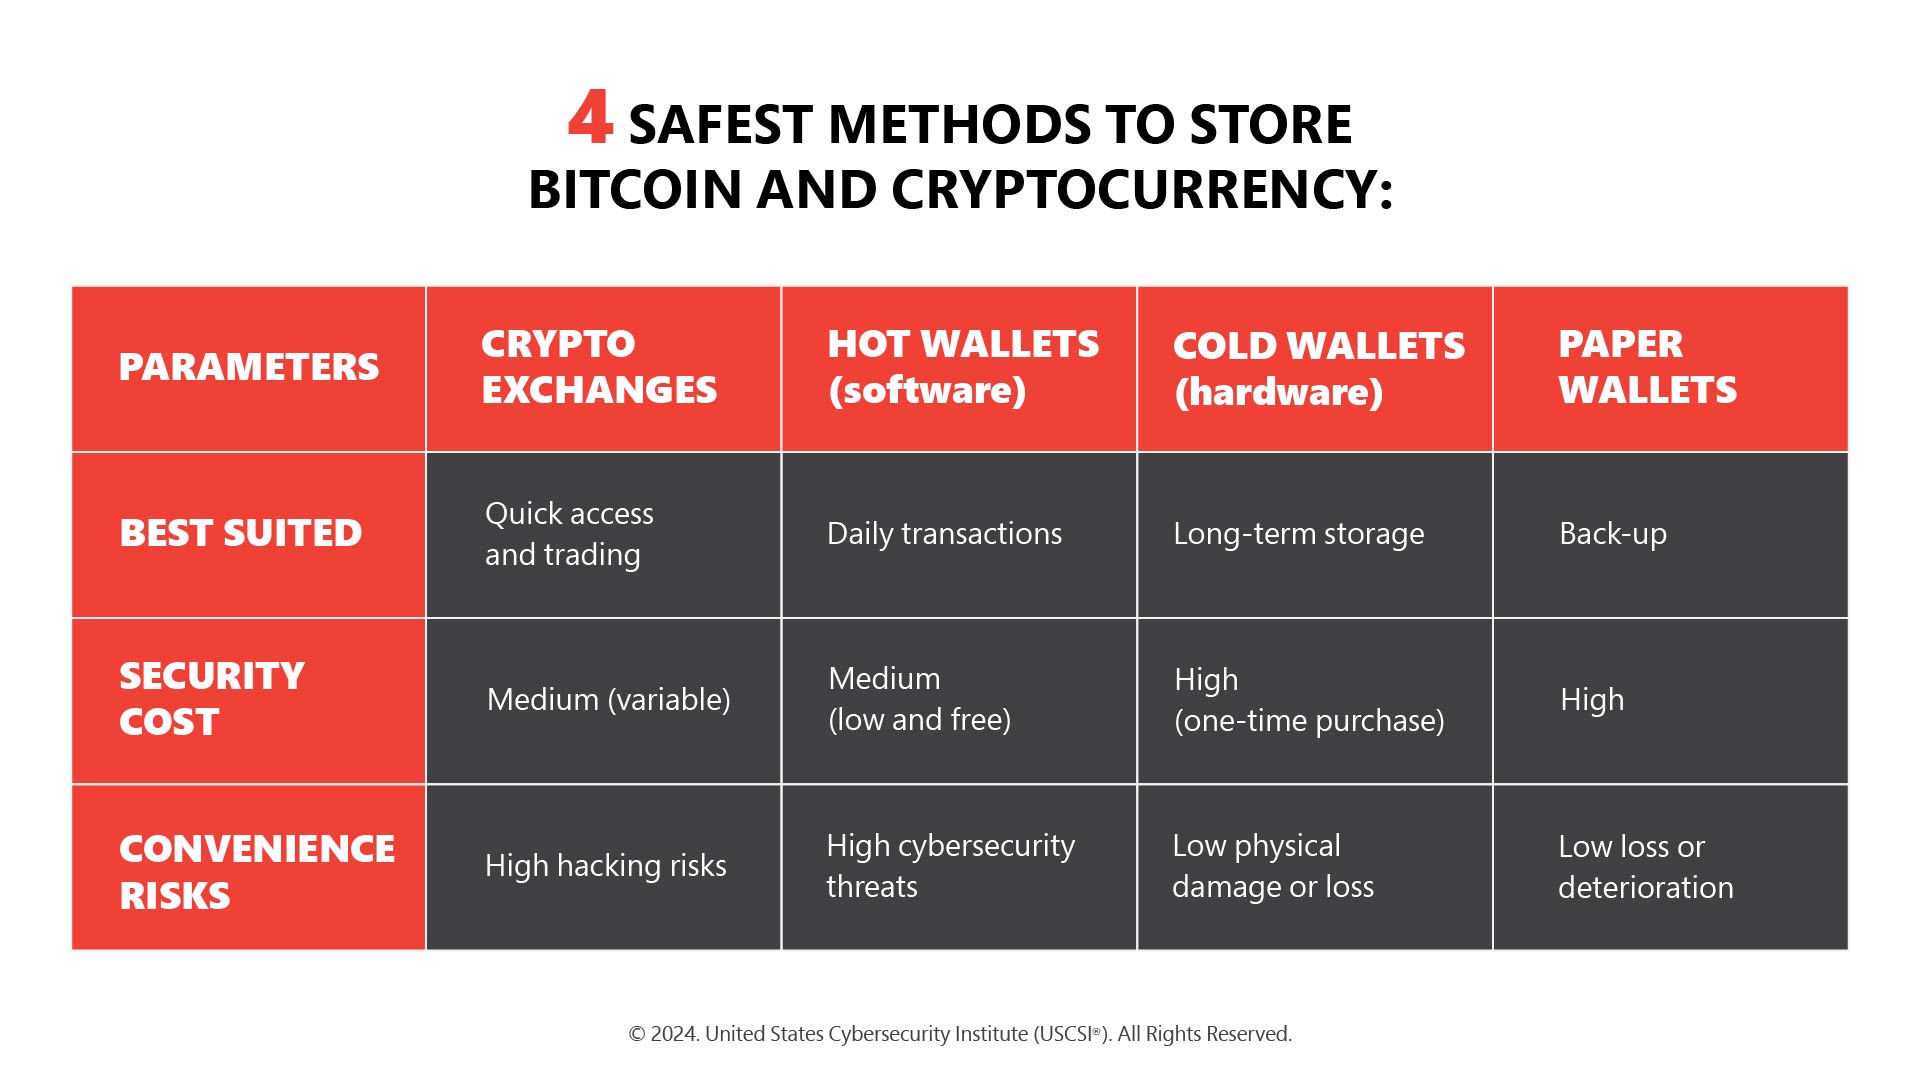 4 Safest Methods to Store Bitcoin and Cryptocurrency